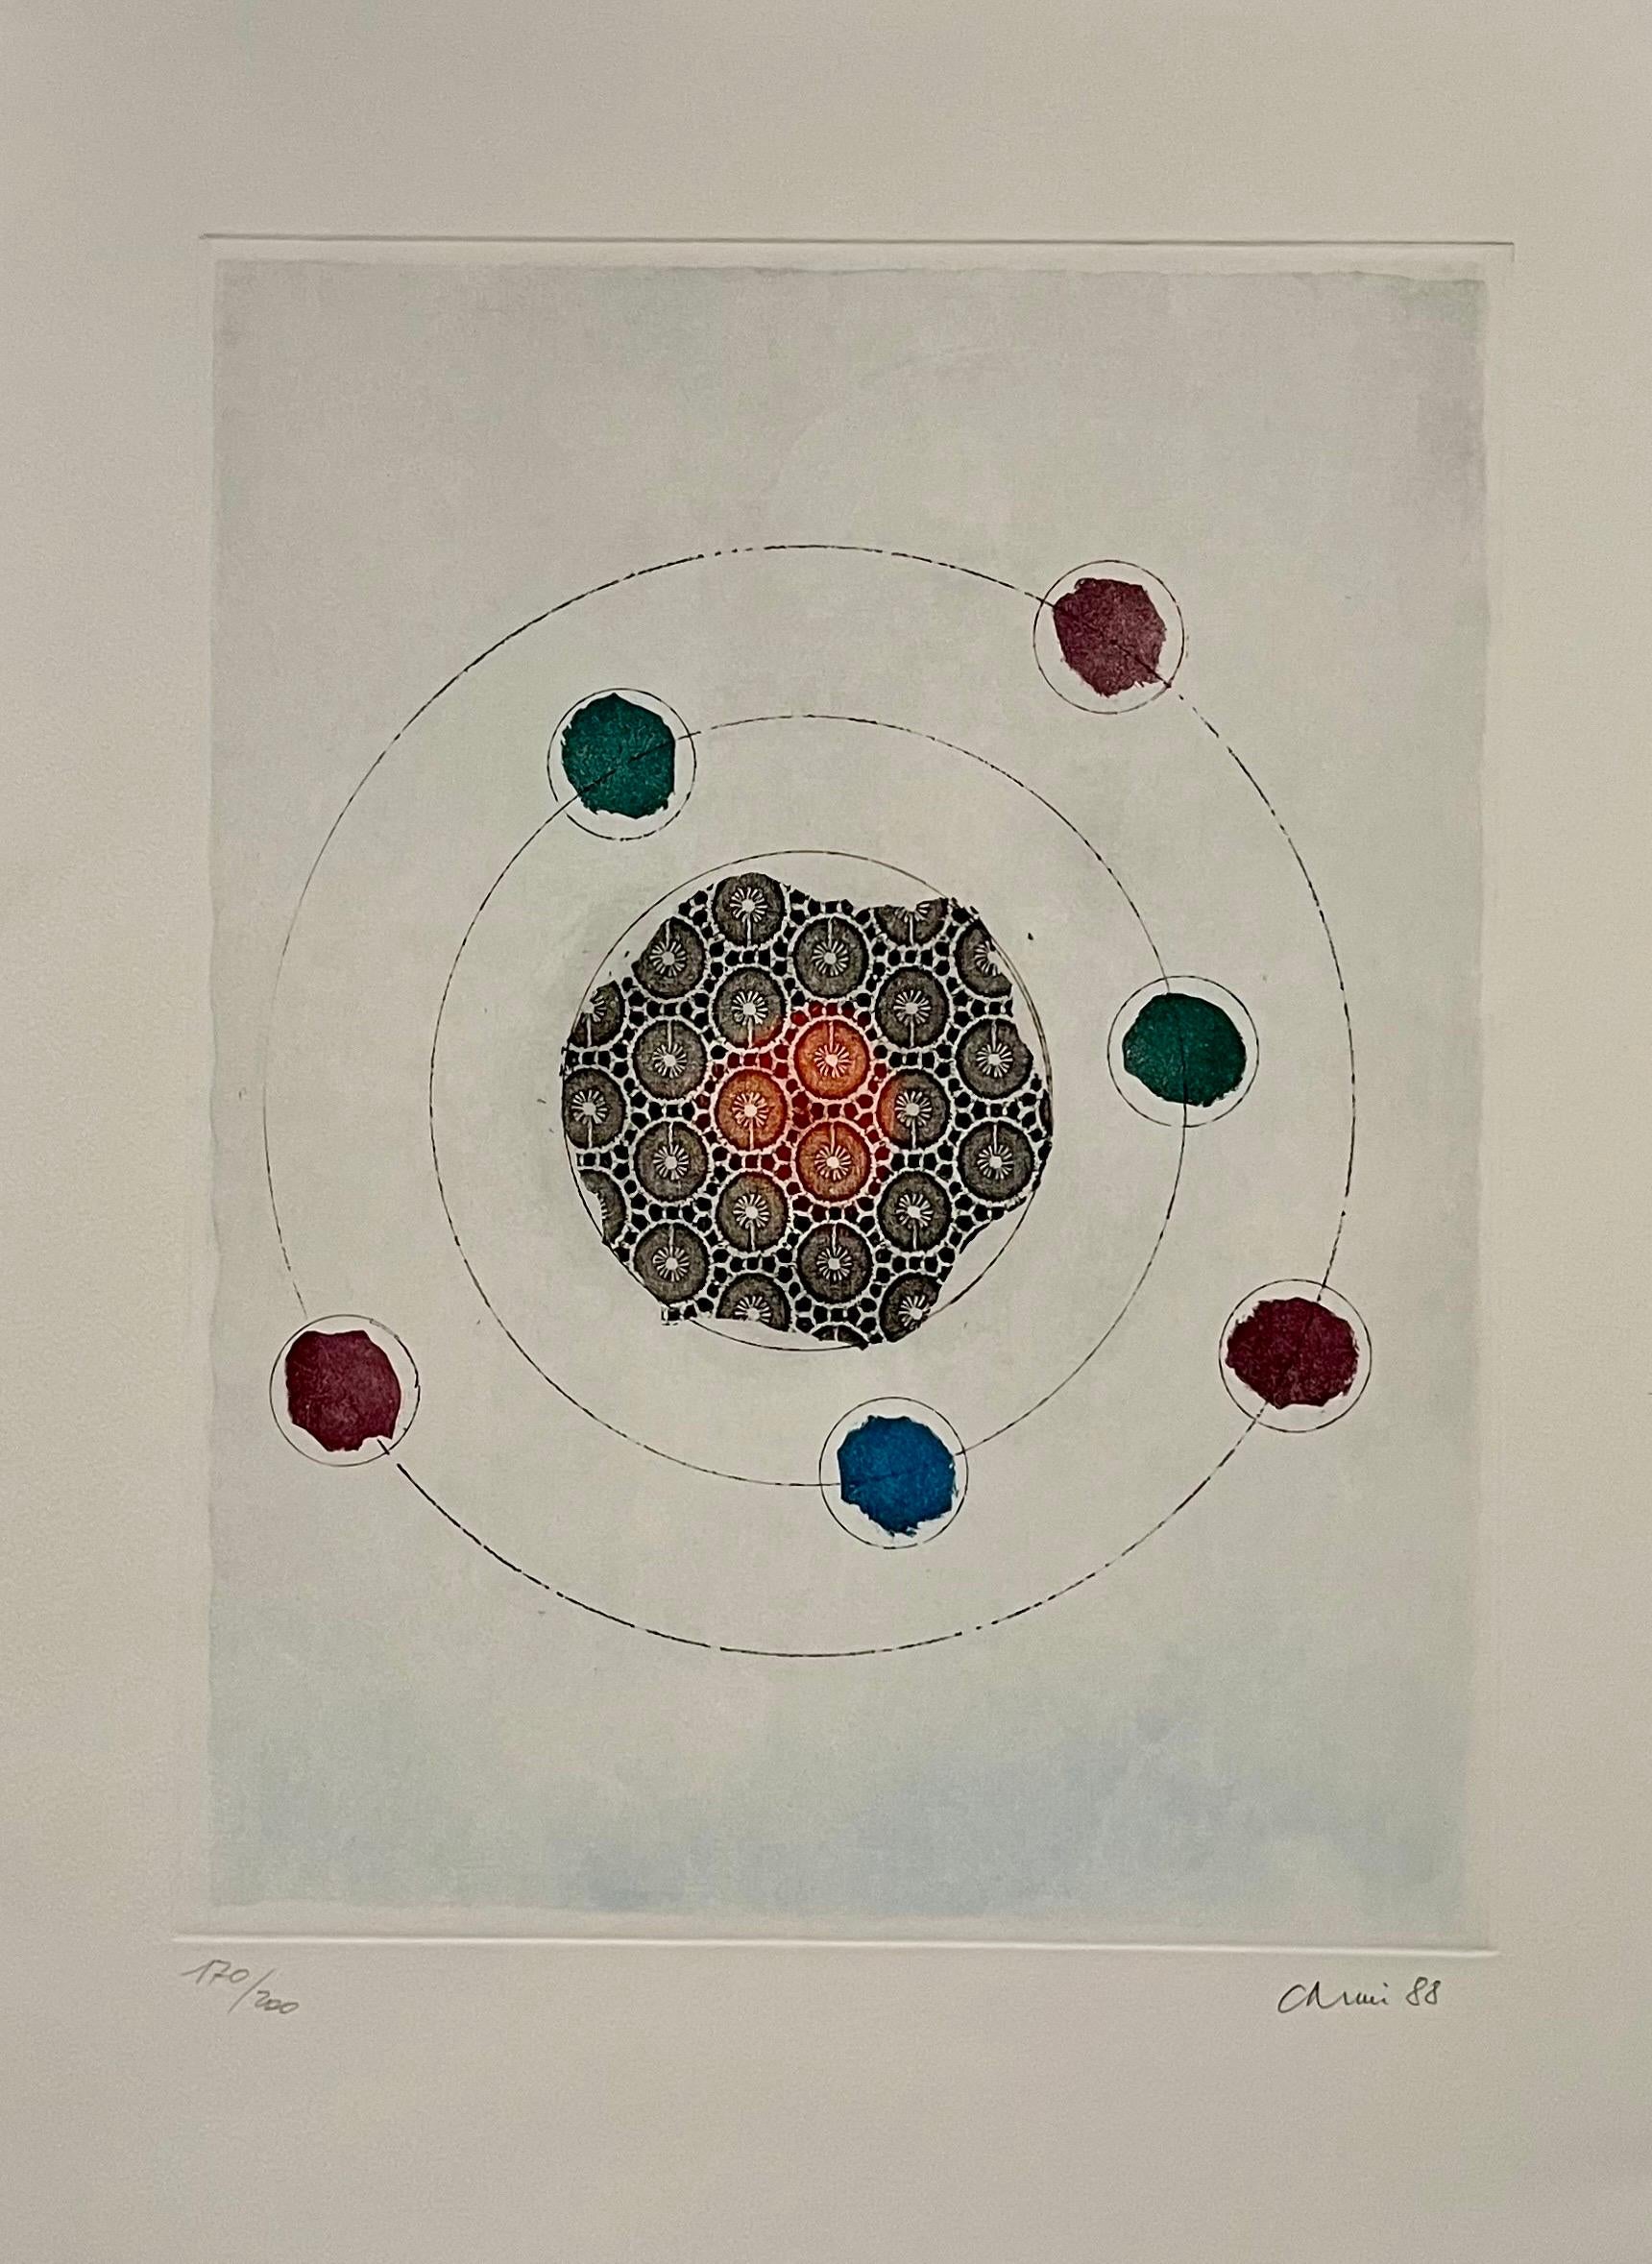 Genre: Modern, Modernist
Subject: Abstract
Medium: Print, Aquatint with metal foil
Hand signed dated 1988, limited edition
Surface: Paper
Country: Italy
Dimensions: 26" x 20" approximately

Eugenio Carmi is an Italian painter born in 1920 in Genoa.